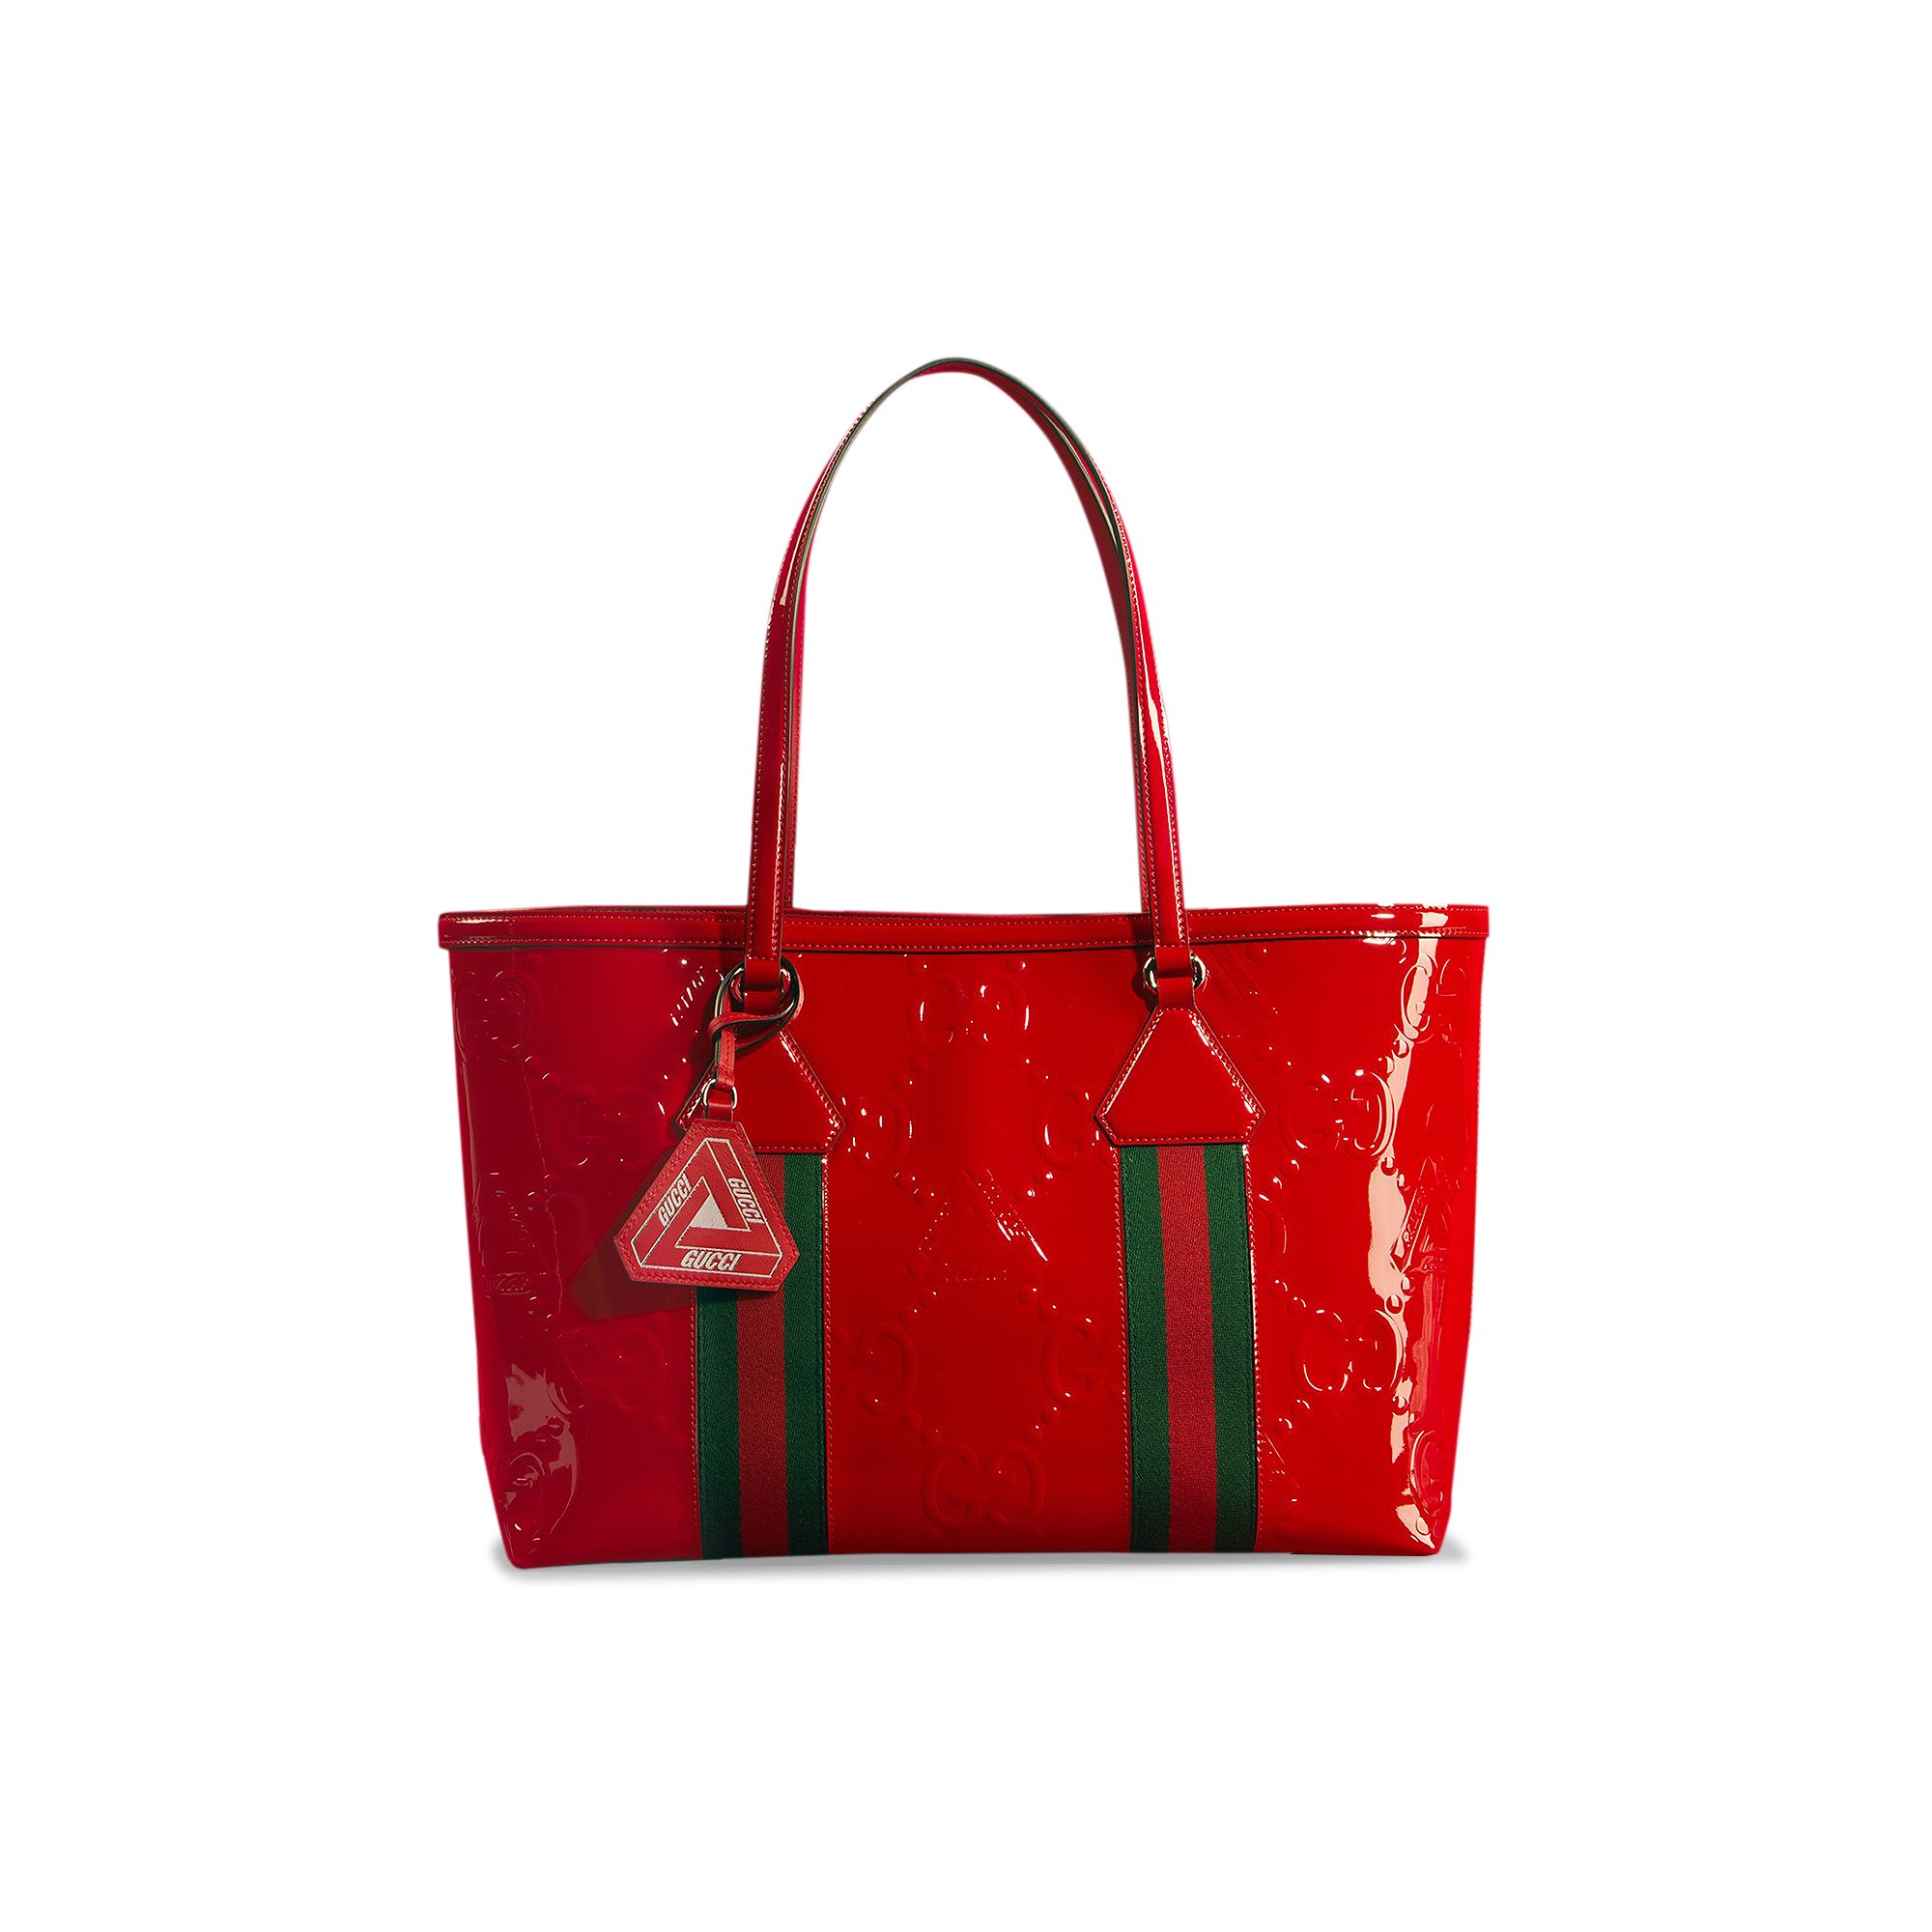 Buy Gucci x Palace Embossed GG Jumbo Patent Leather Tote Bag 'Dark 